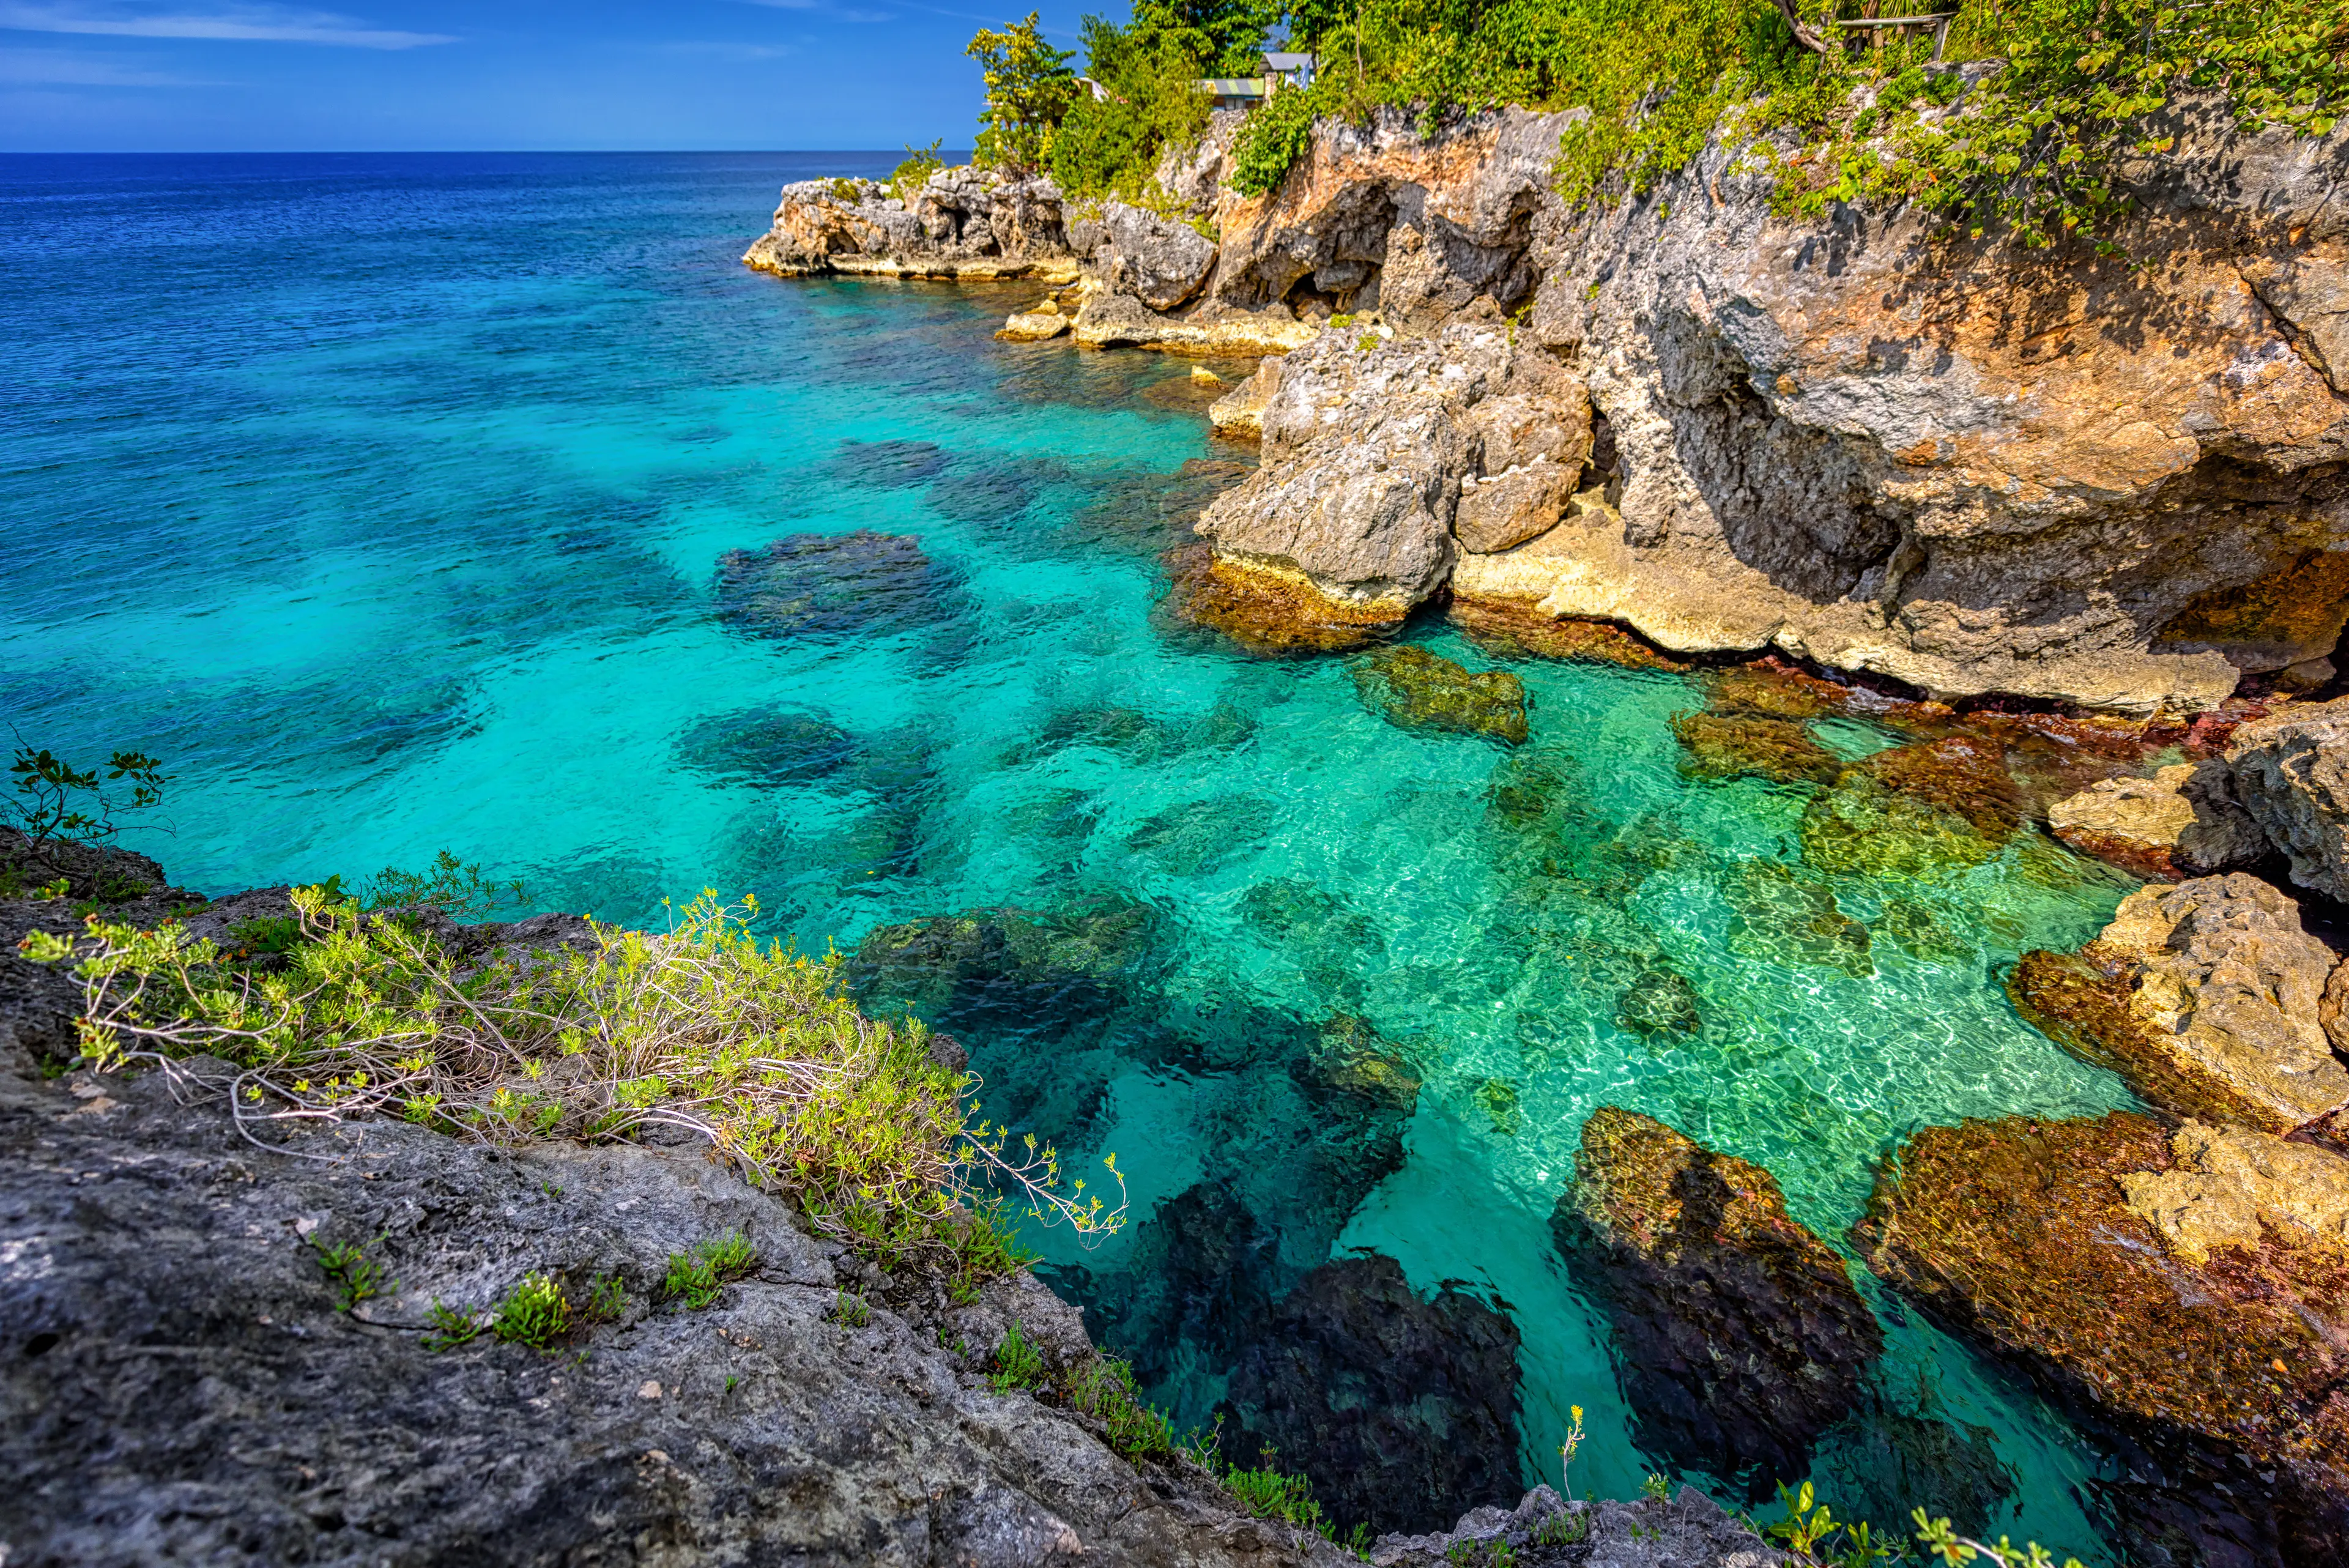 2-Day Family Adventure and Sightseeing in Negril, Jamaica